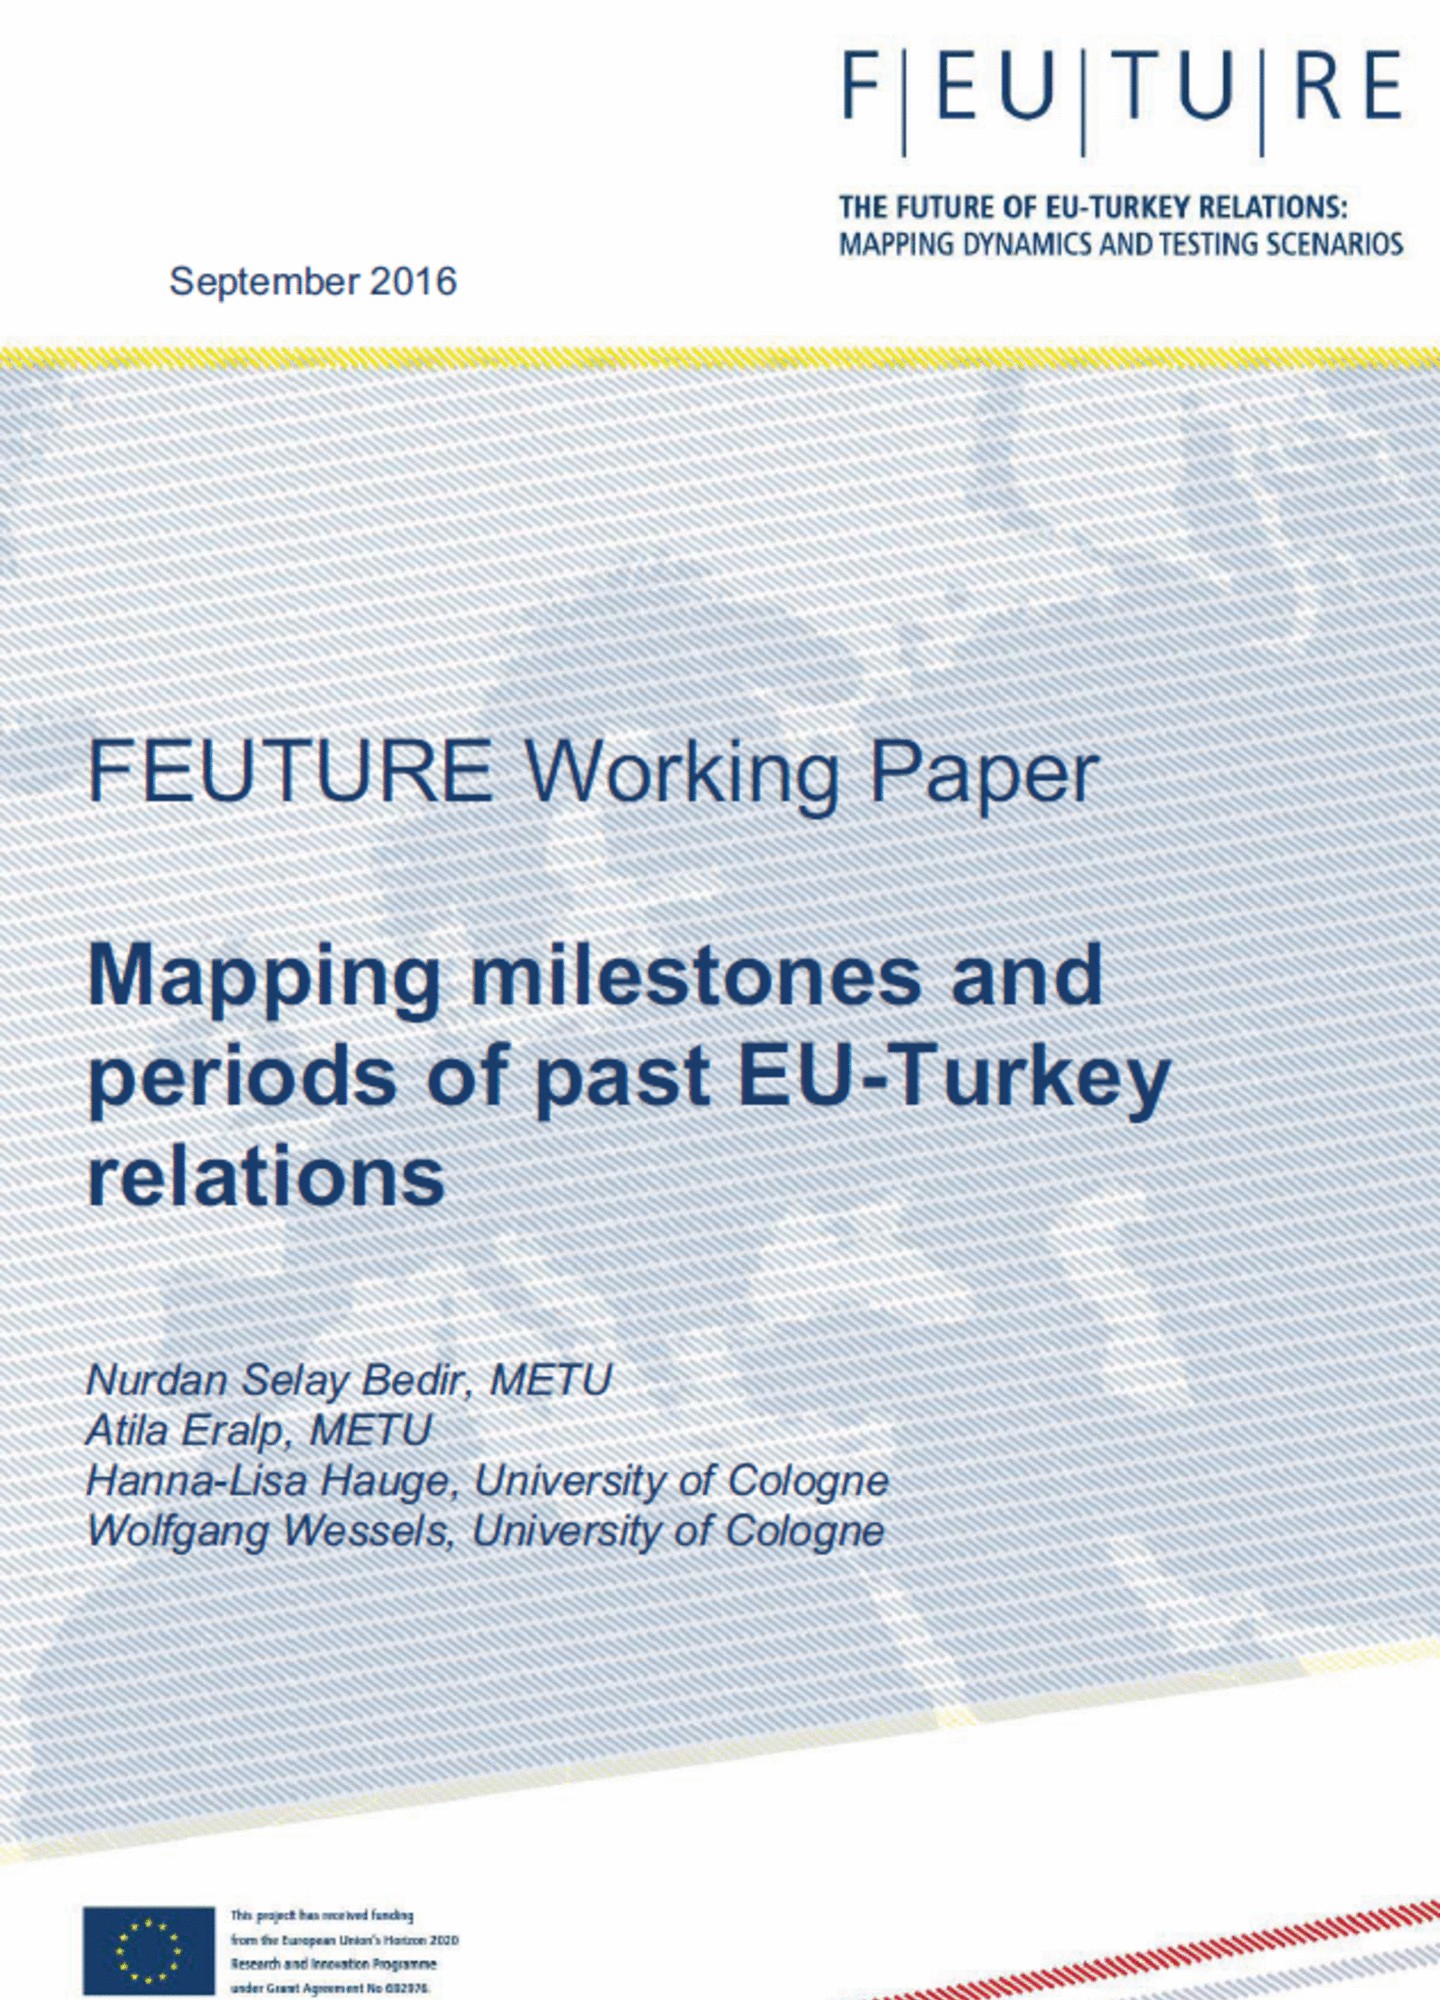 Mapping periods and milestones of past EU-Turkey relations